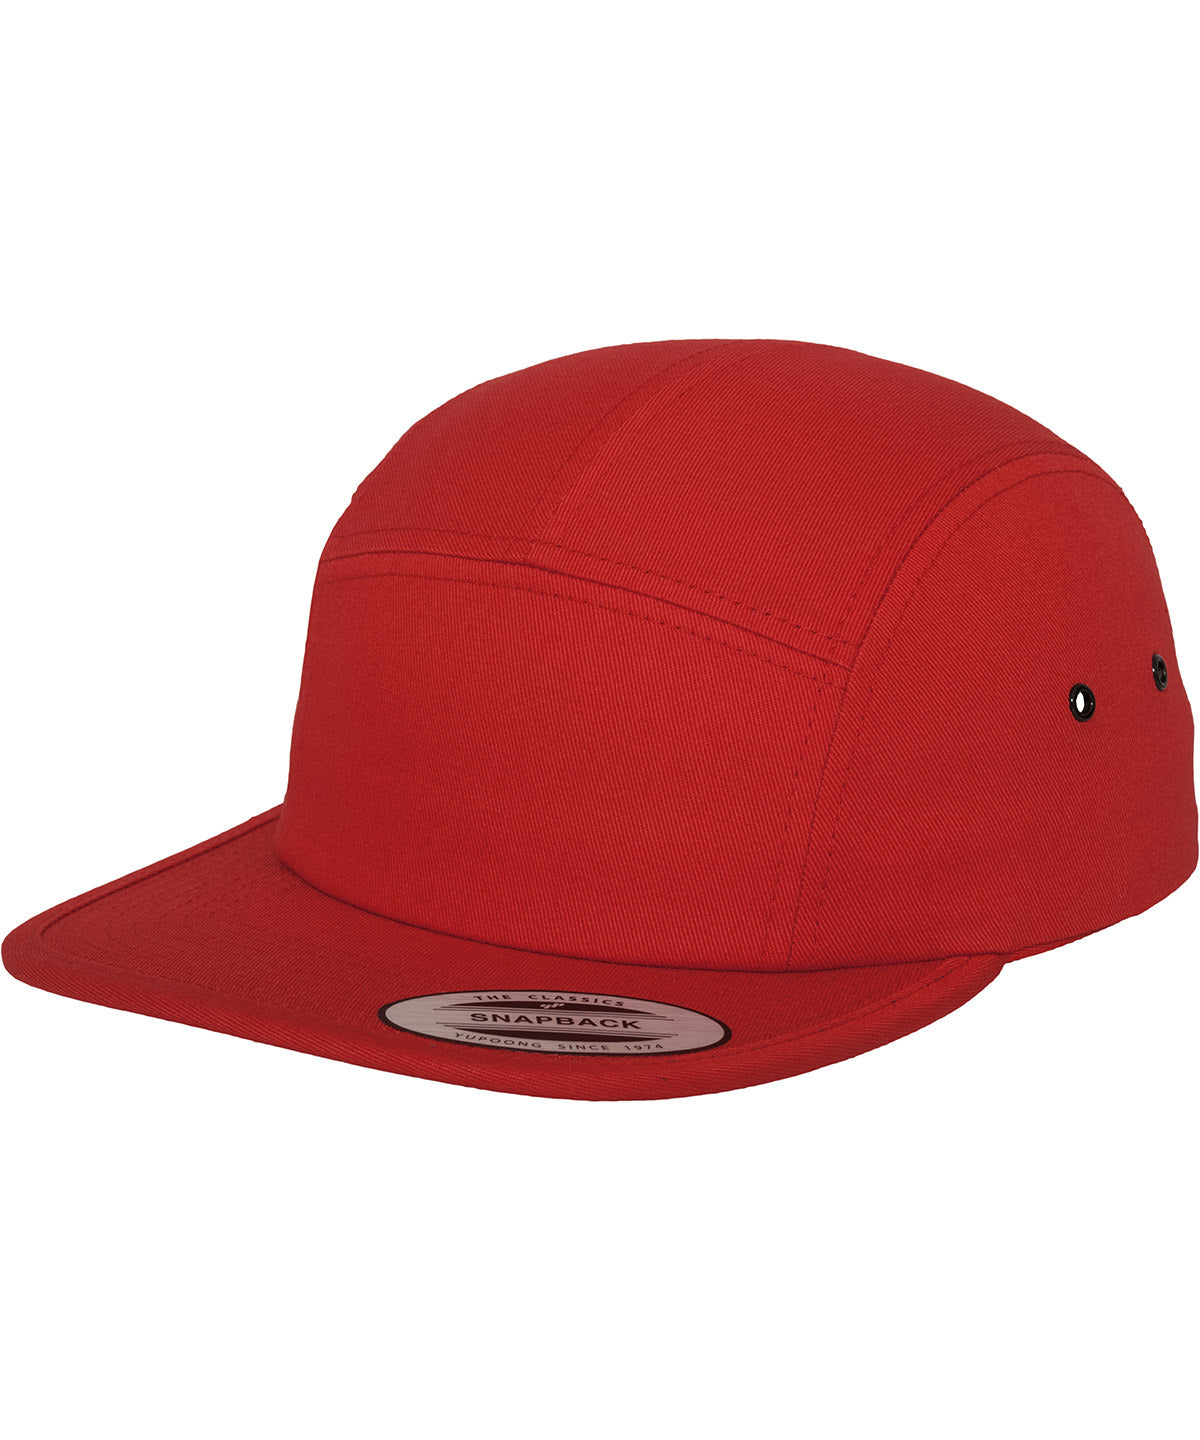 Red - Classic 5-panel jockey cap (7005) Caps Flexfit by Yupoong Headwear, Must Haves, New Colours for 2023, Rebrandable Schoolwear Centres